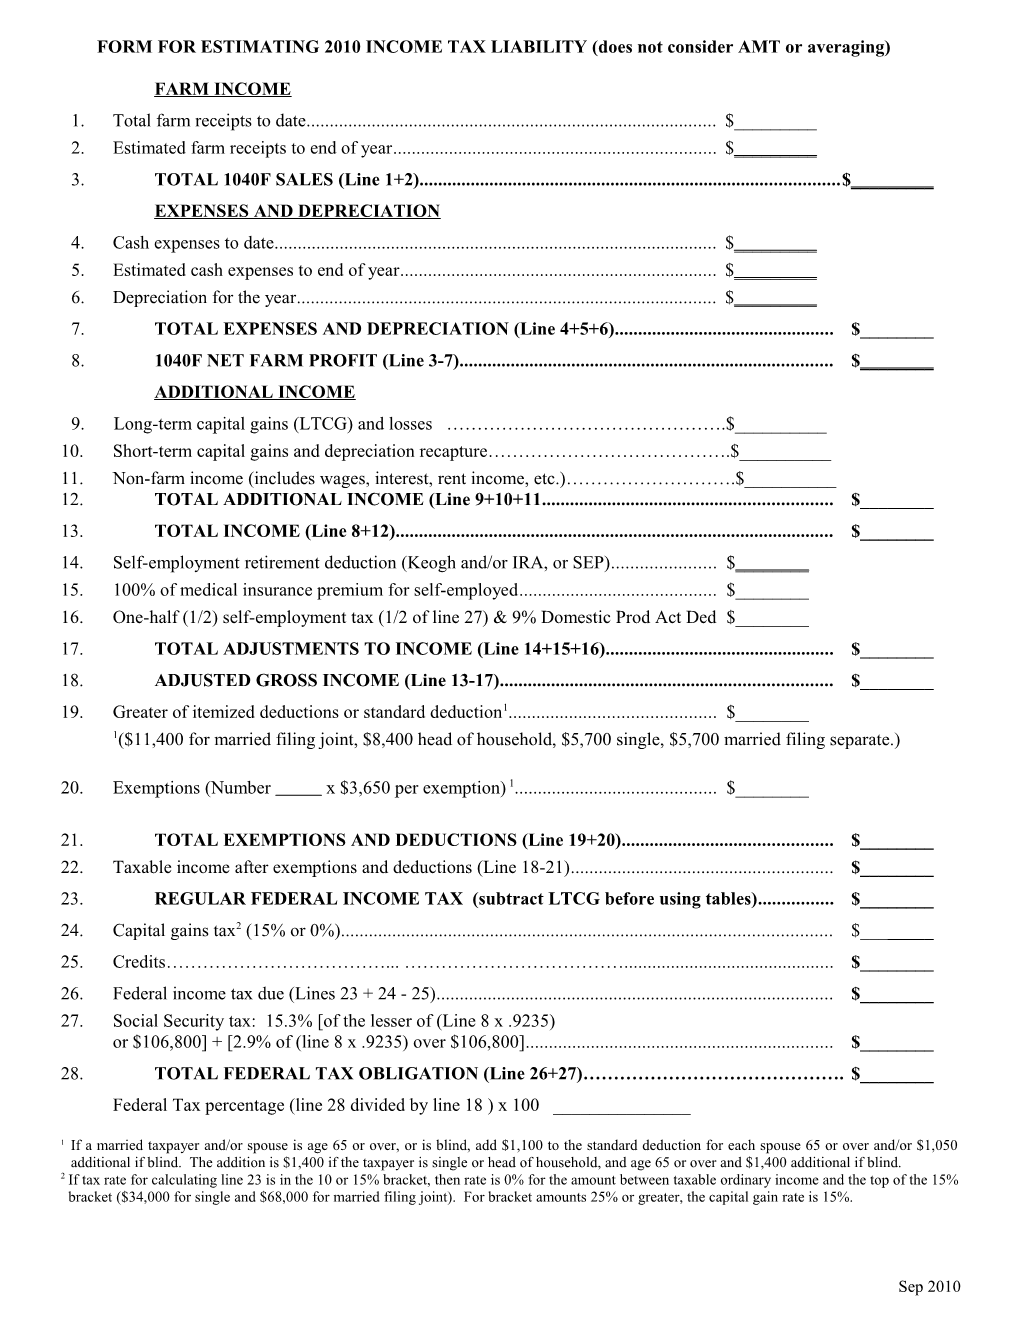 FORM for ESTIMATING 2010 INCOME TAX LIABILITY (Does Not Consider AMT Or Averaging)